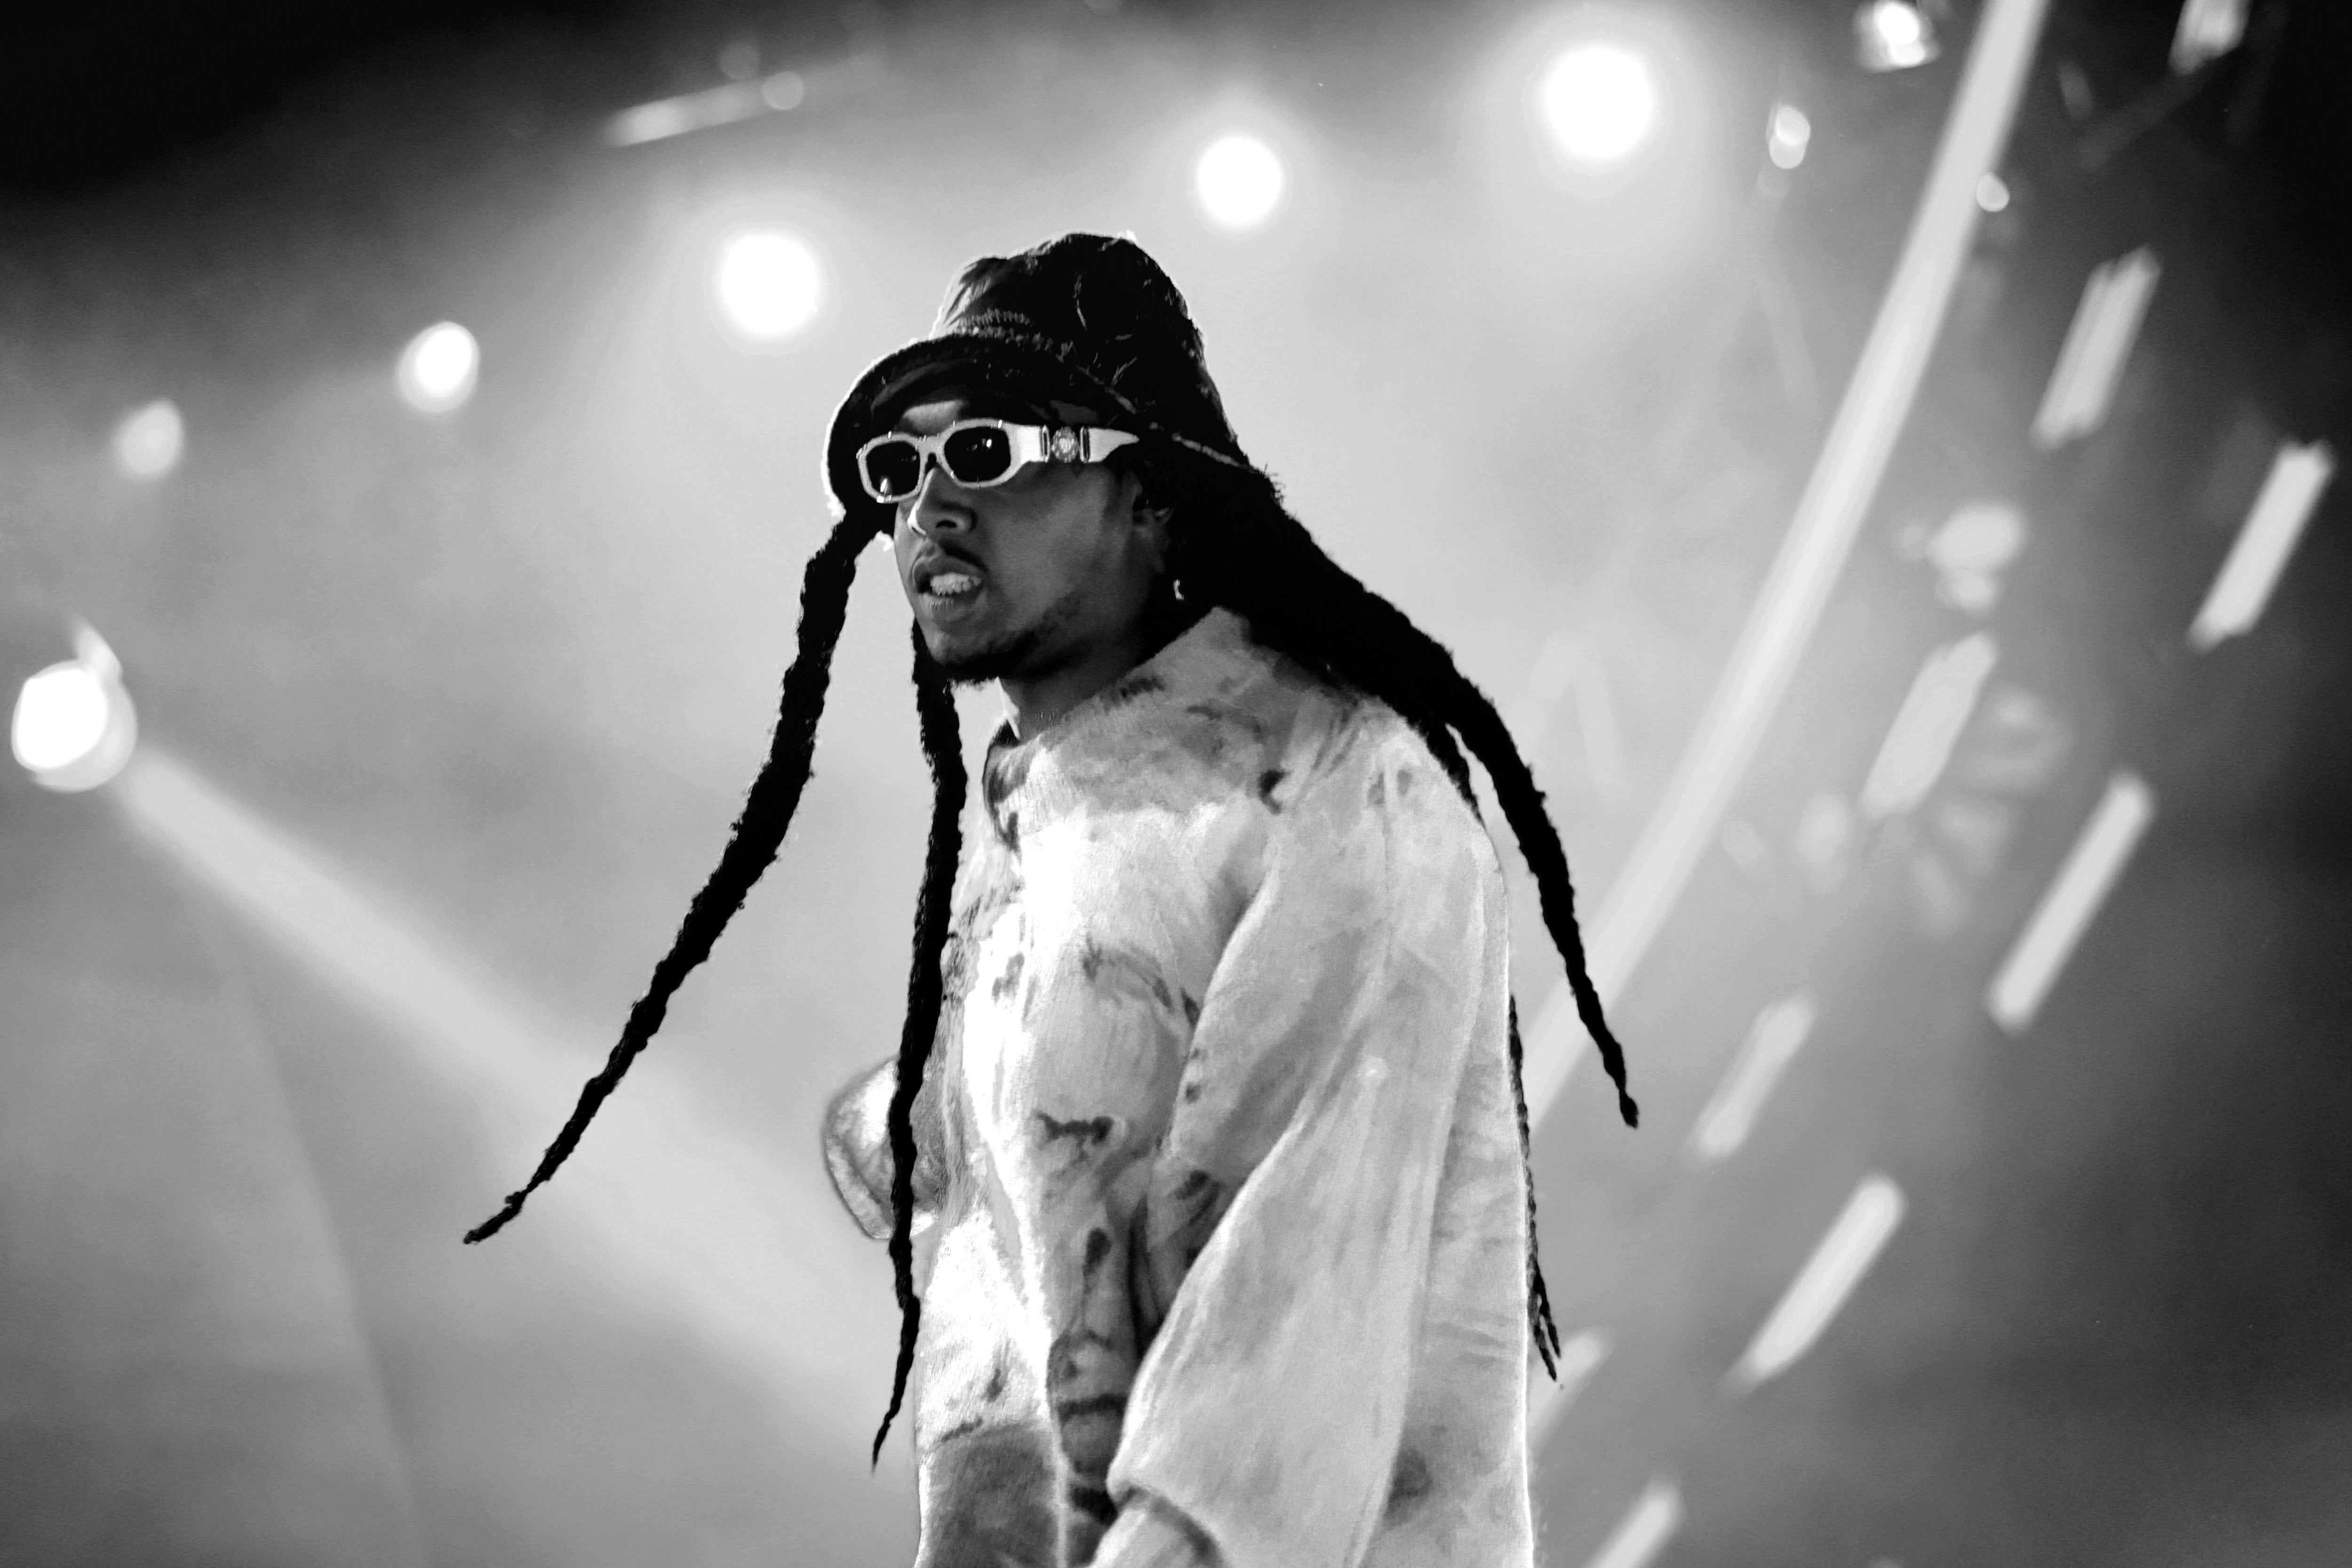 A black-and-white photo shows the rapper looking stylish on stage in sunglasses and an almost Paddington-esque hat and a baggy patterned shirt or sweatshirt, his teeth bared and his long dreads flying out around him.